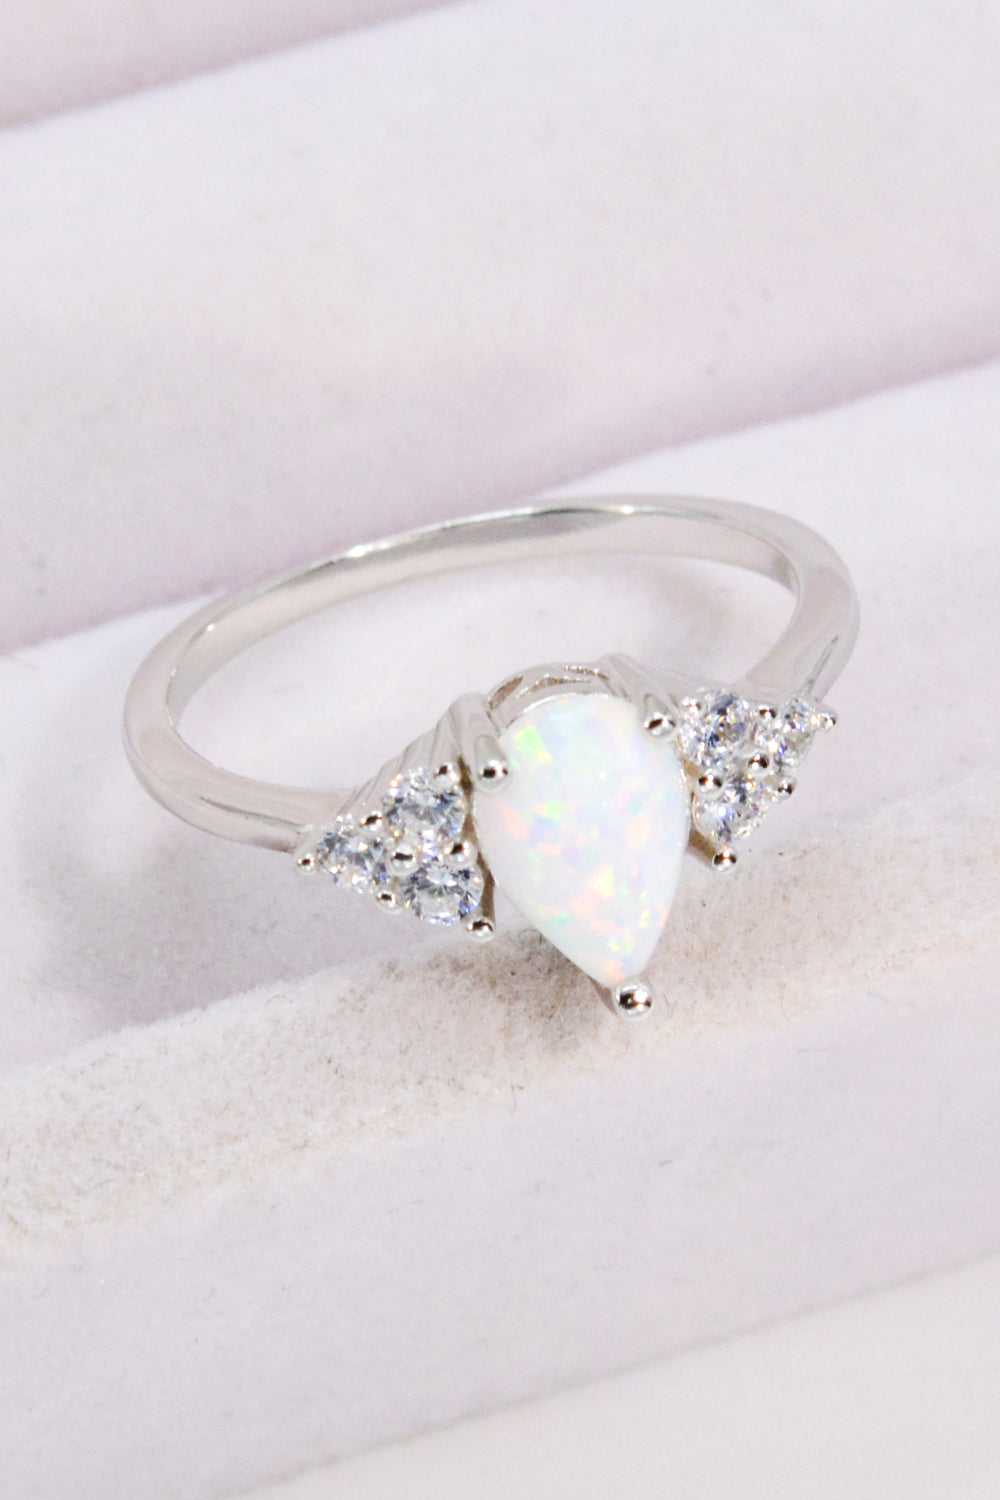 Limitless Love Opal and Zircon Ring - Ryzela